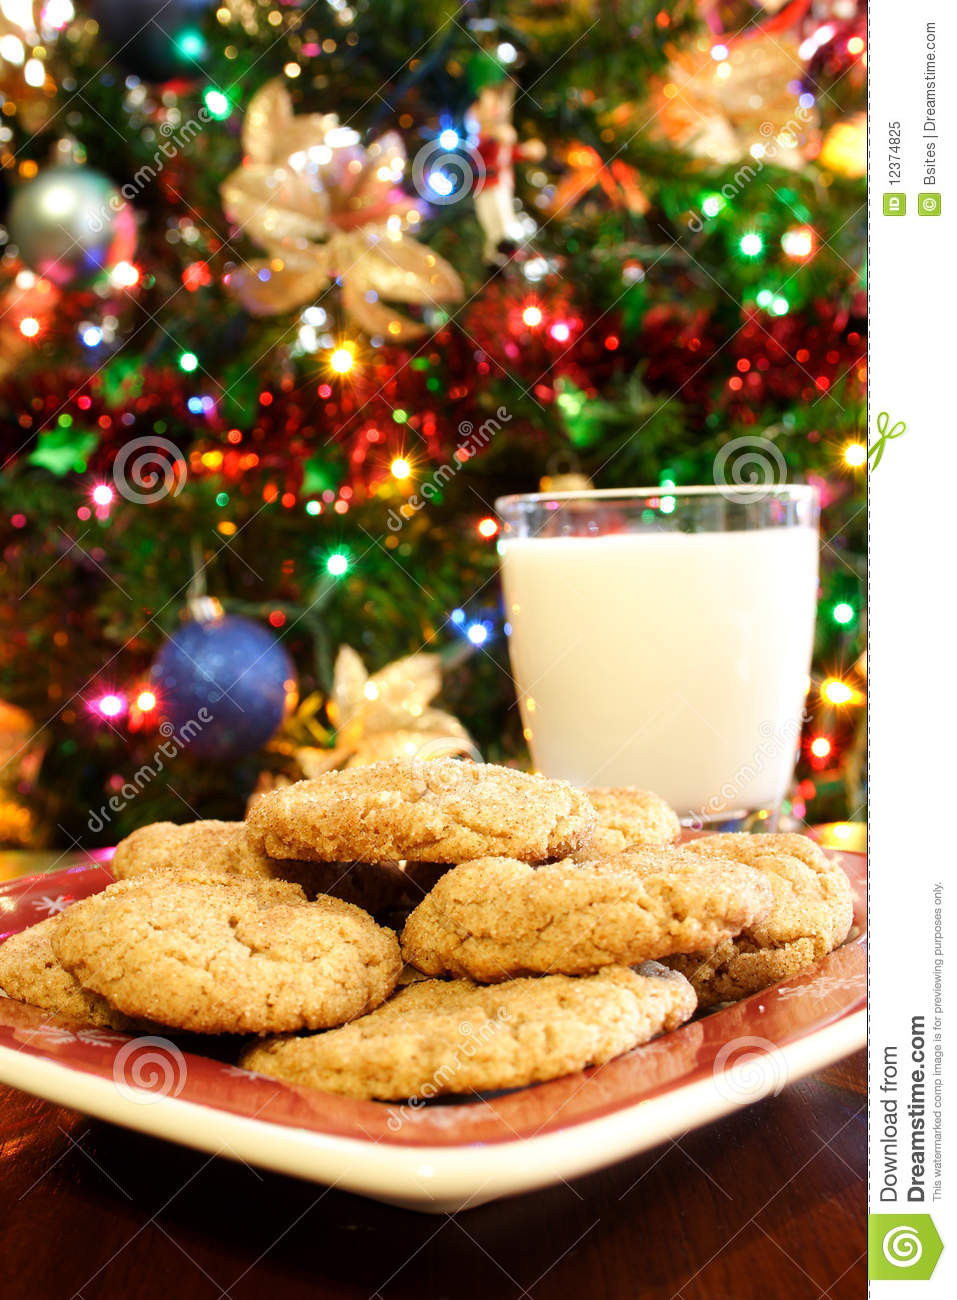 Christmas Milk And Cookies
 Christmas Milk and Cookies stock image Image of cookie